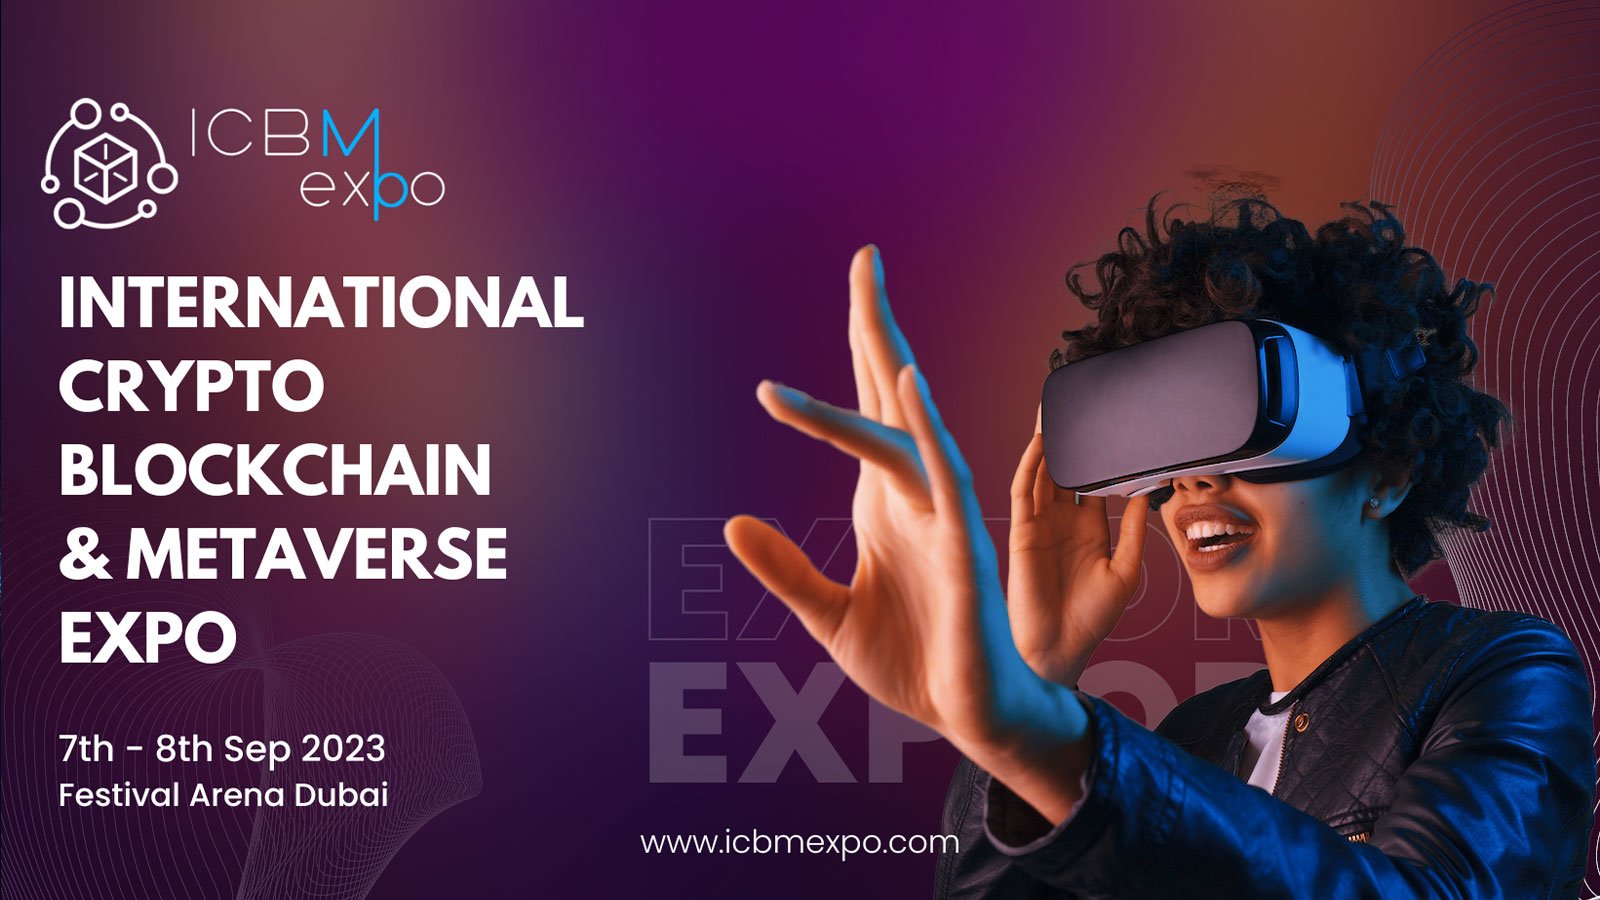 Don't Miss Out: Get Ready for International Crypto, Blockchain & Metaverse Expo 2023 (ICBM Expo) - An Unforgettable Experience at the Crypto, Blockchain & Metaverse Exhibition!